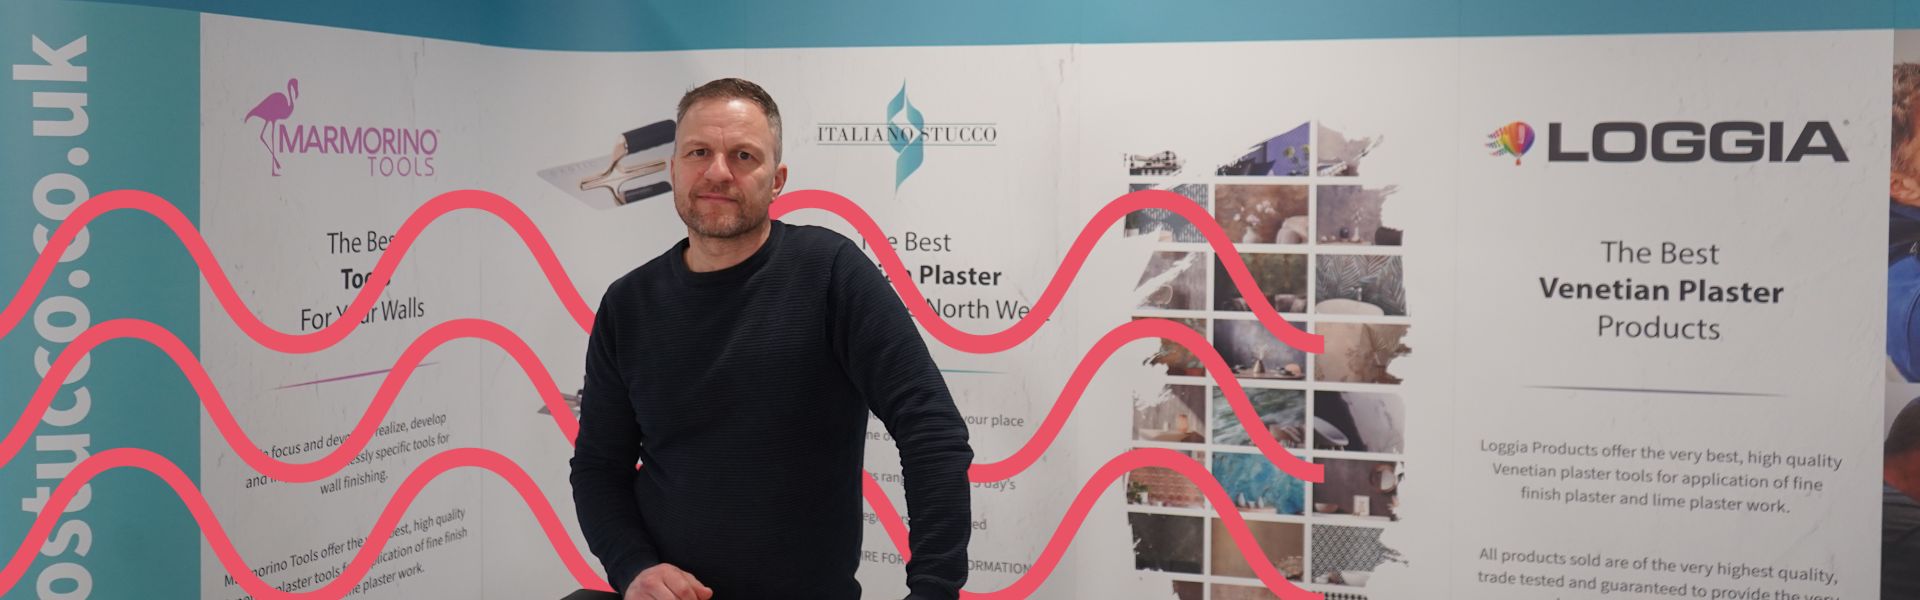 Construction employer stood in front of a promotional banner 